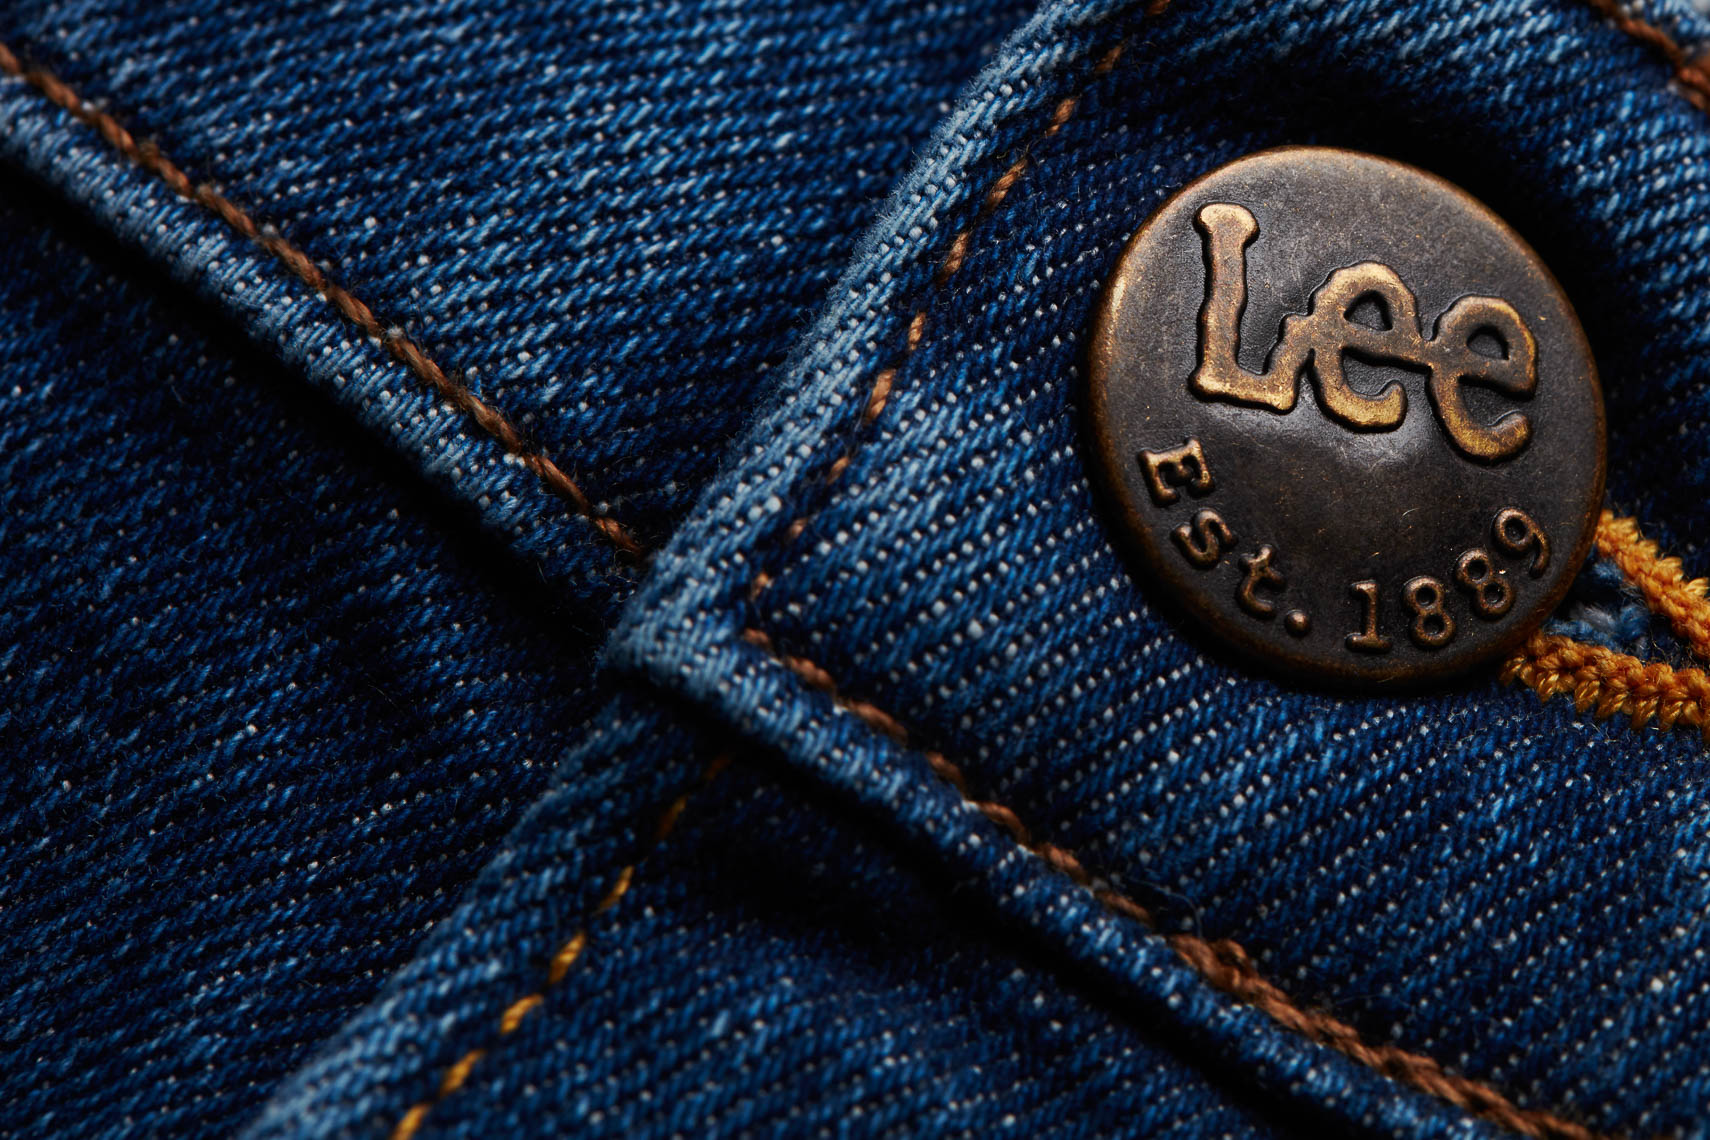 LeeJeansIconicProductDetails_Mens_TwitchLogoButton3